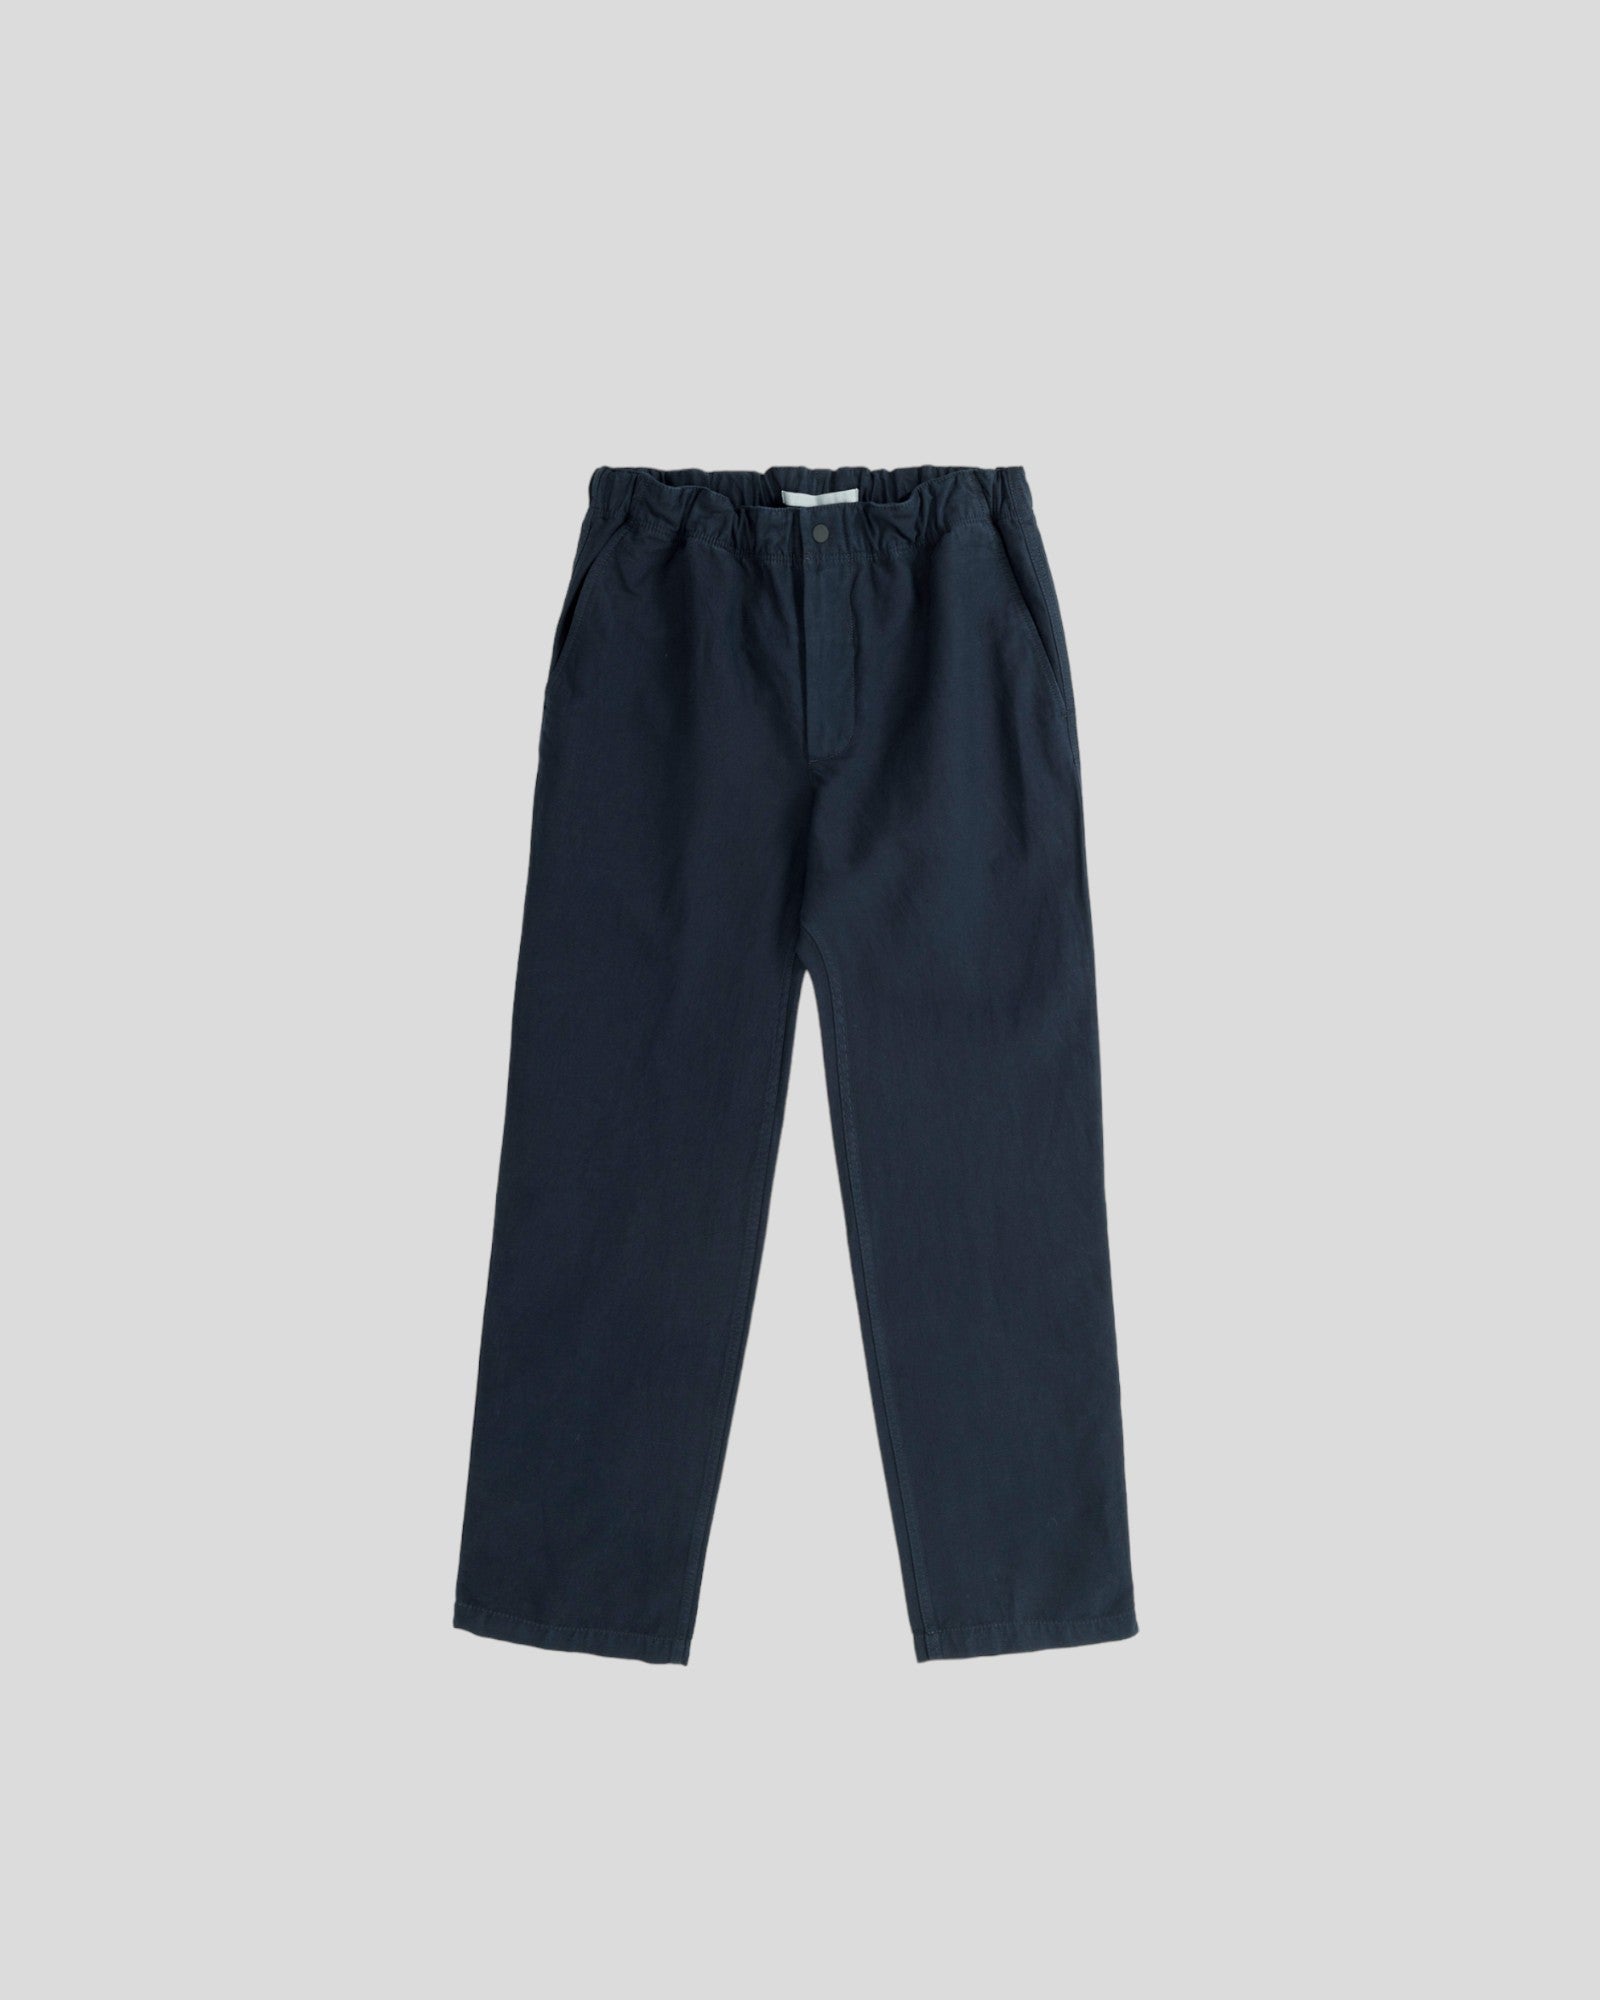 Norse projects || Ezra Relaxed Cotton Linen Trousers - Dark Navy